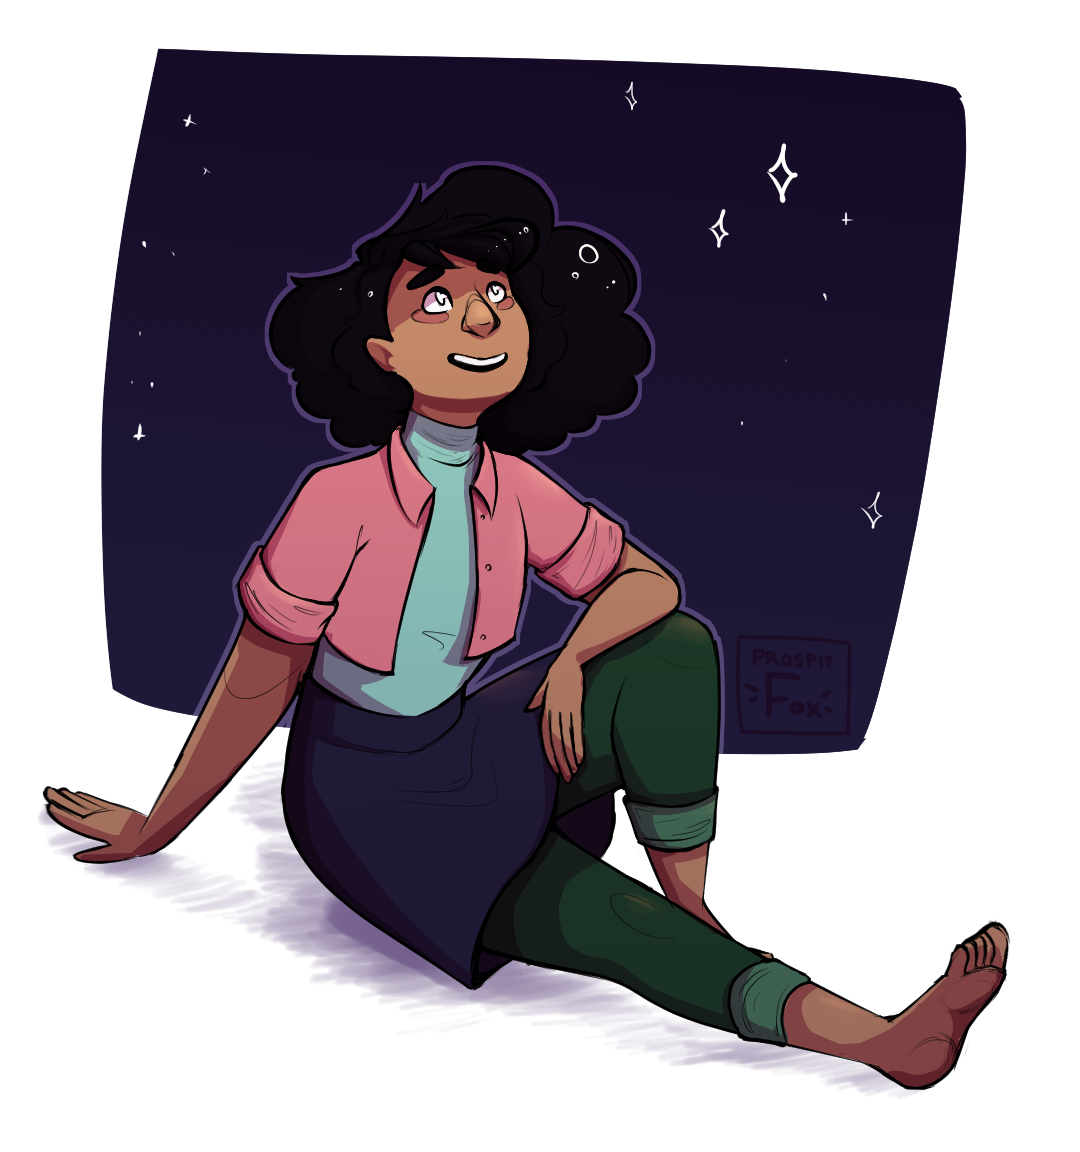 after the party, steven and connie go out and look at stars ~